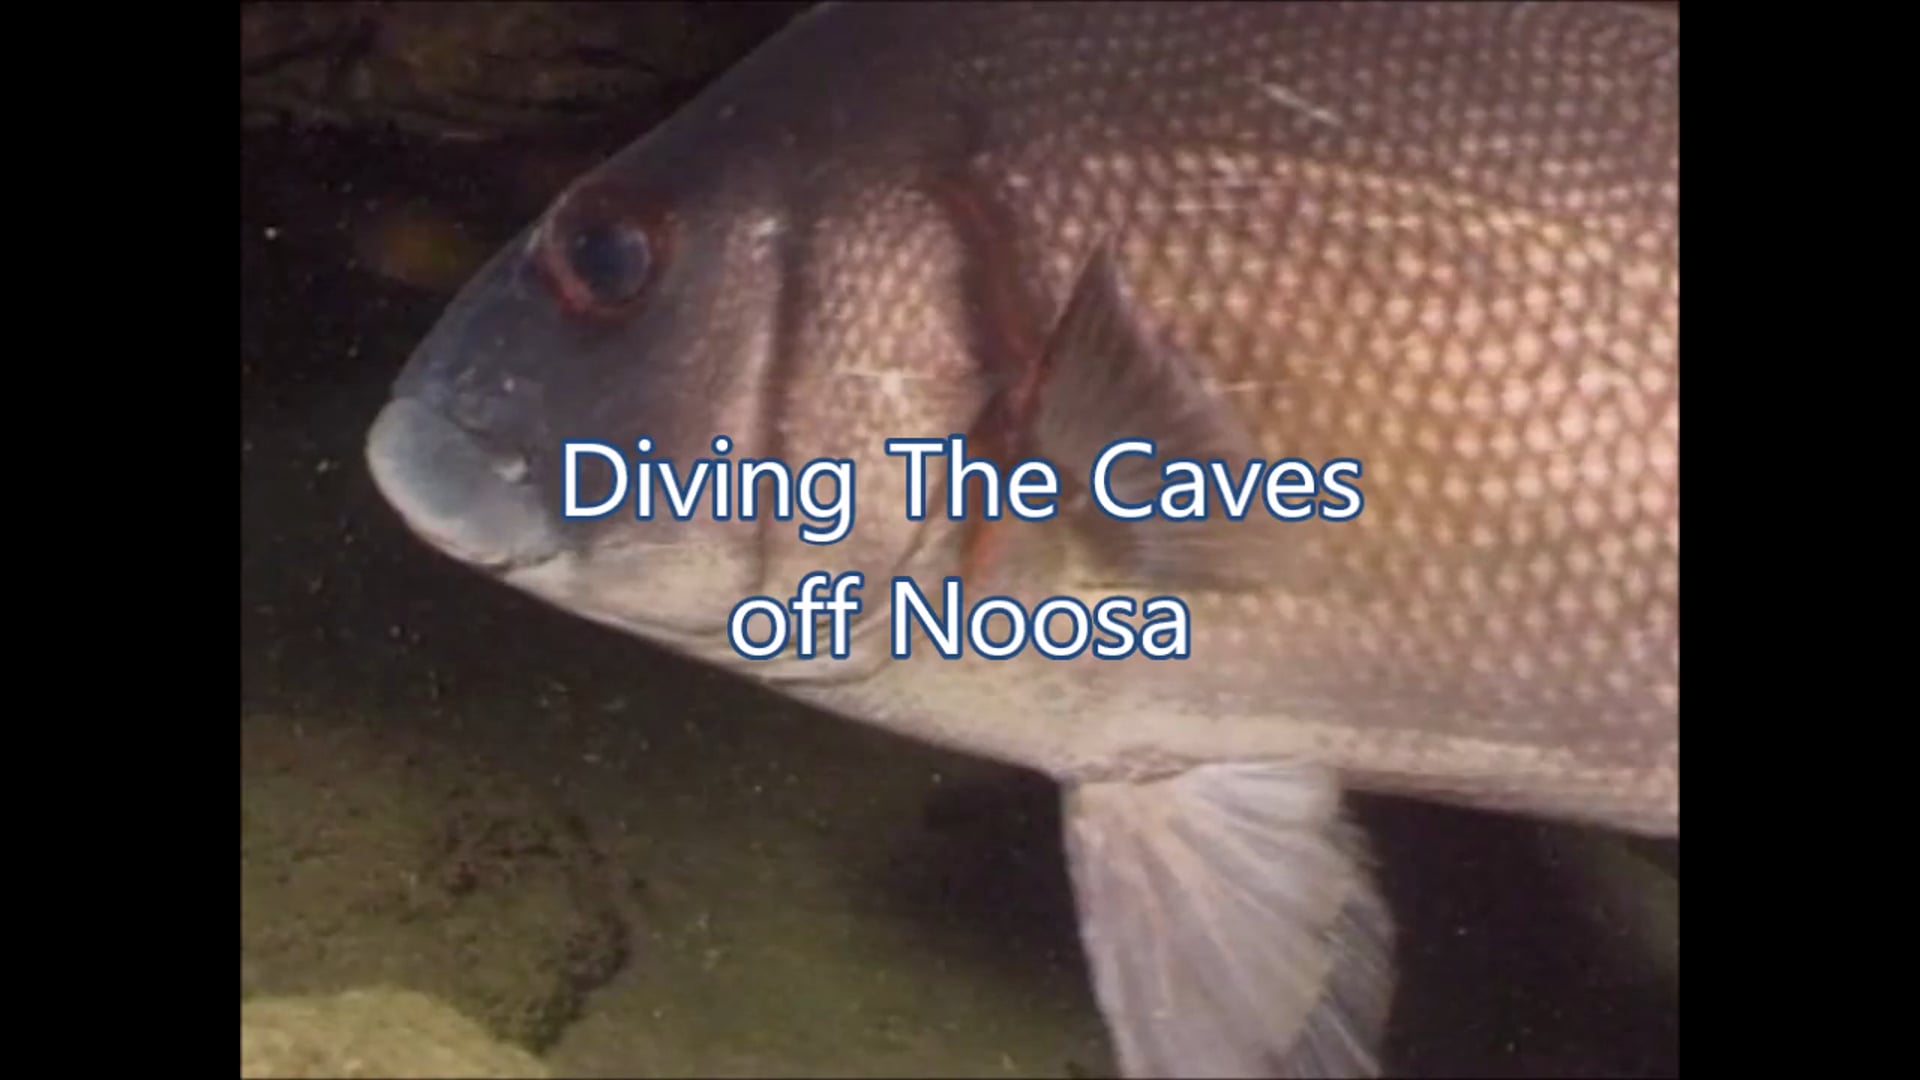 Diving The Caves off Noosa